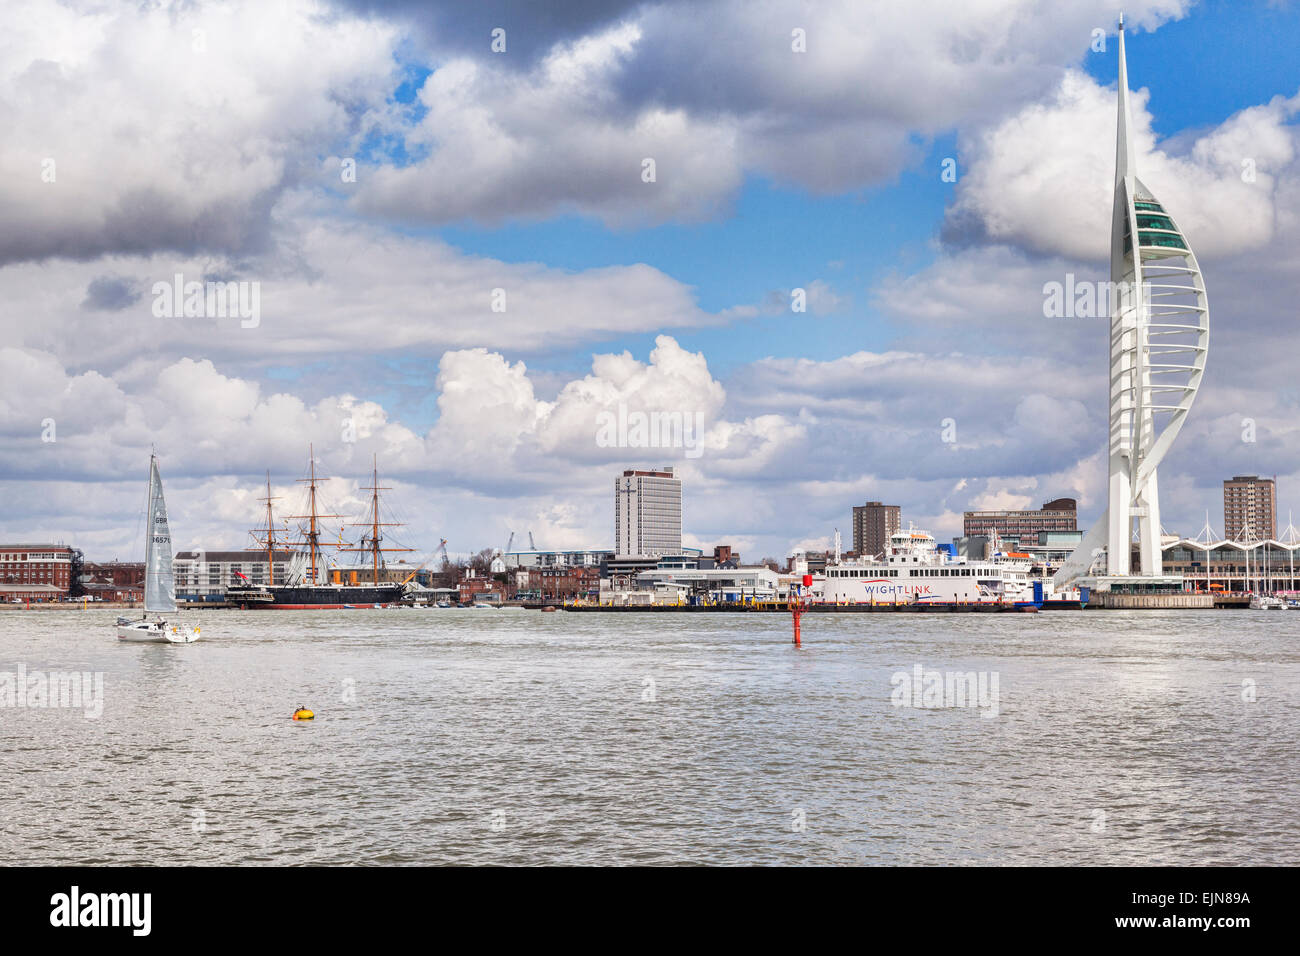 Portsmouth Harbour from the sea, with the Spinnaker Tower and HMS Warrior, and the Isle of Wight ferry. Stock Photo